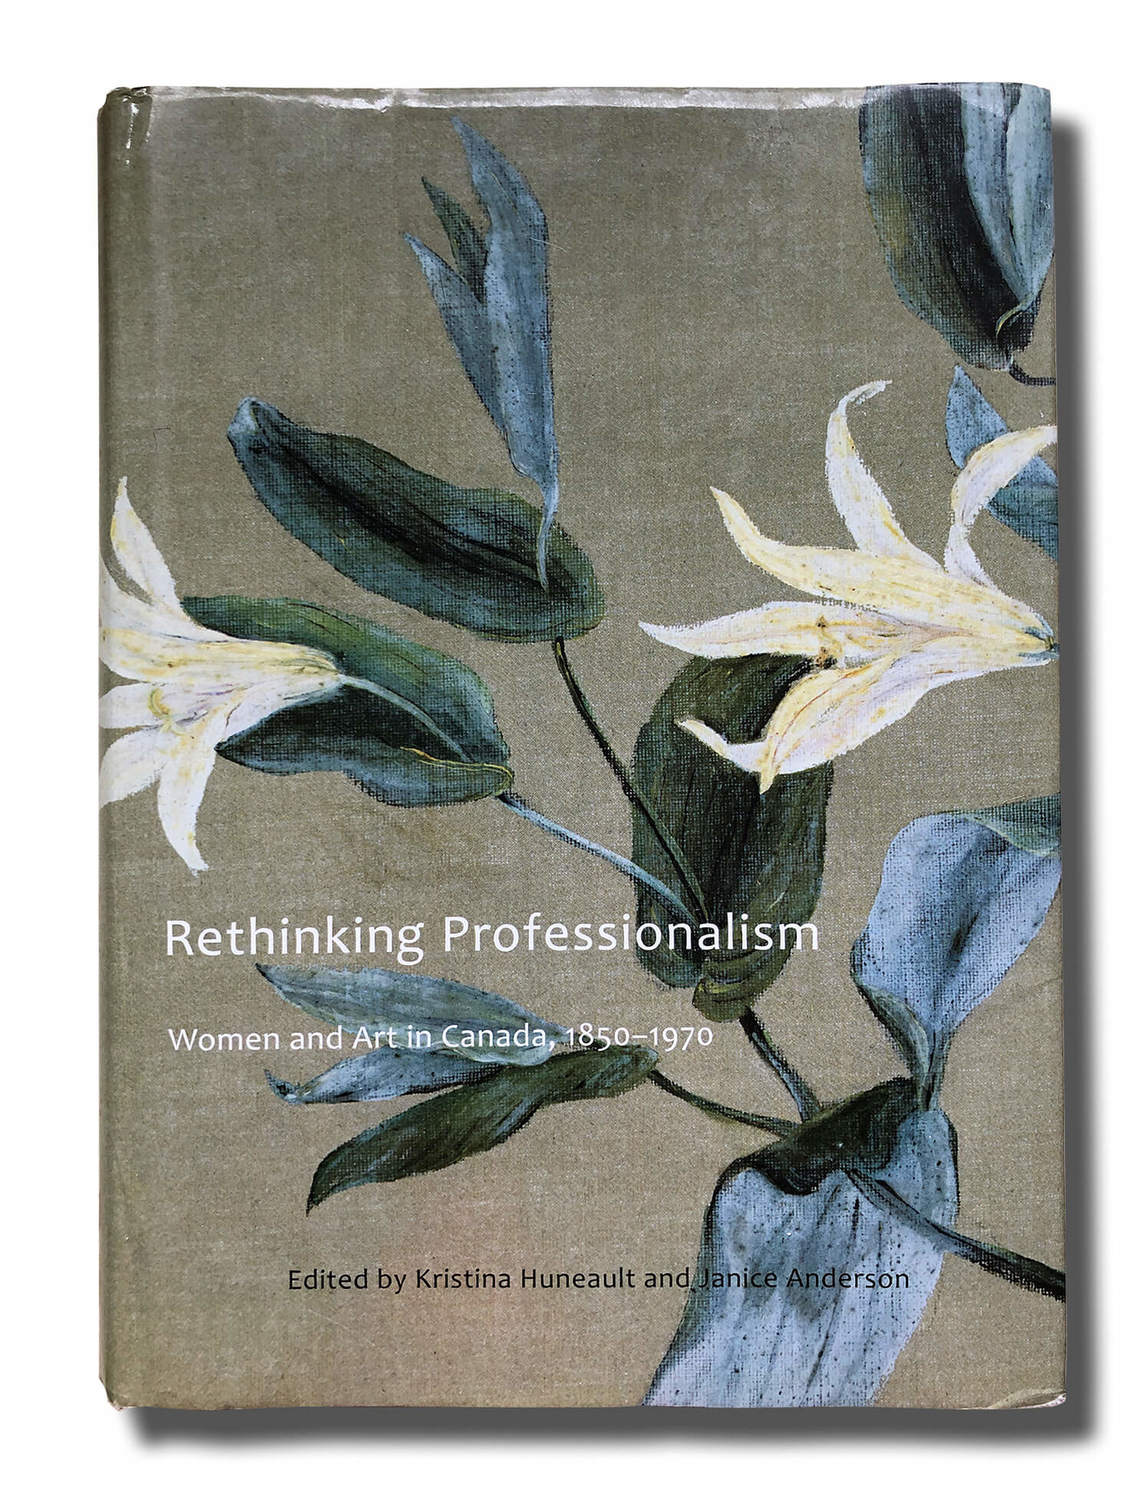 Page couverture de Rethinking Professionialism: Women and Art in Canada, 1850-1970